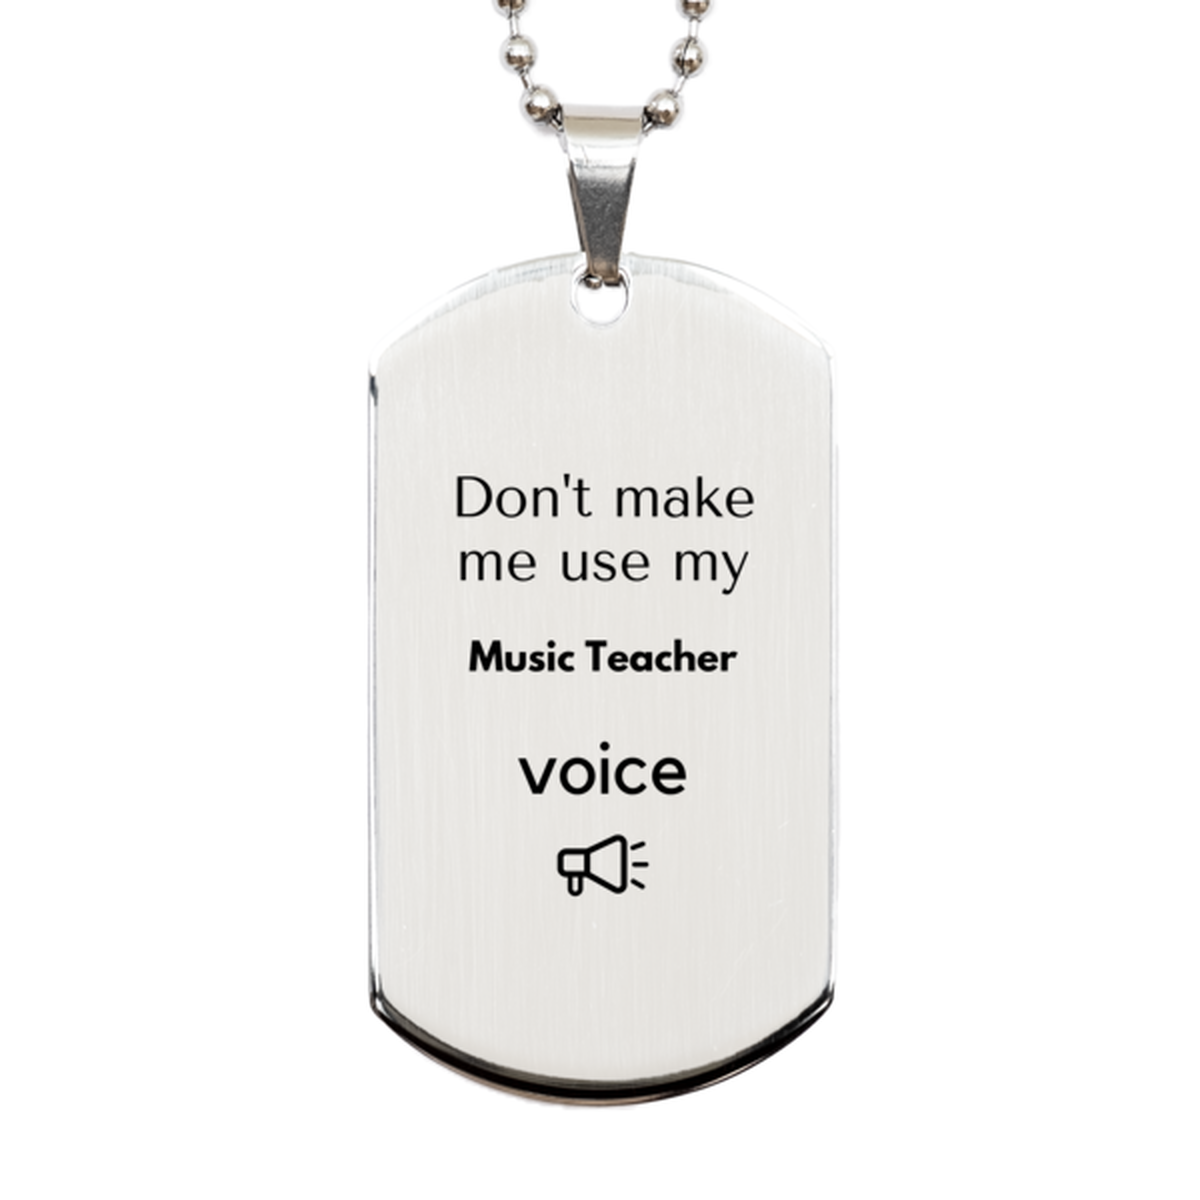 Don't make me use my Music Teacher voice, Sarcasm Music Teacher Gifts, Christmas Music Teacher Silver Dog Tag Birthday Unique Gifts For Music Teacher Coworkers, Men, Women, Colleague, Friends